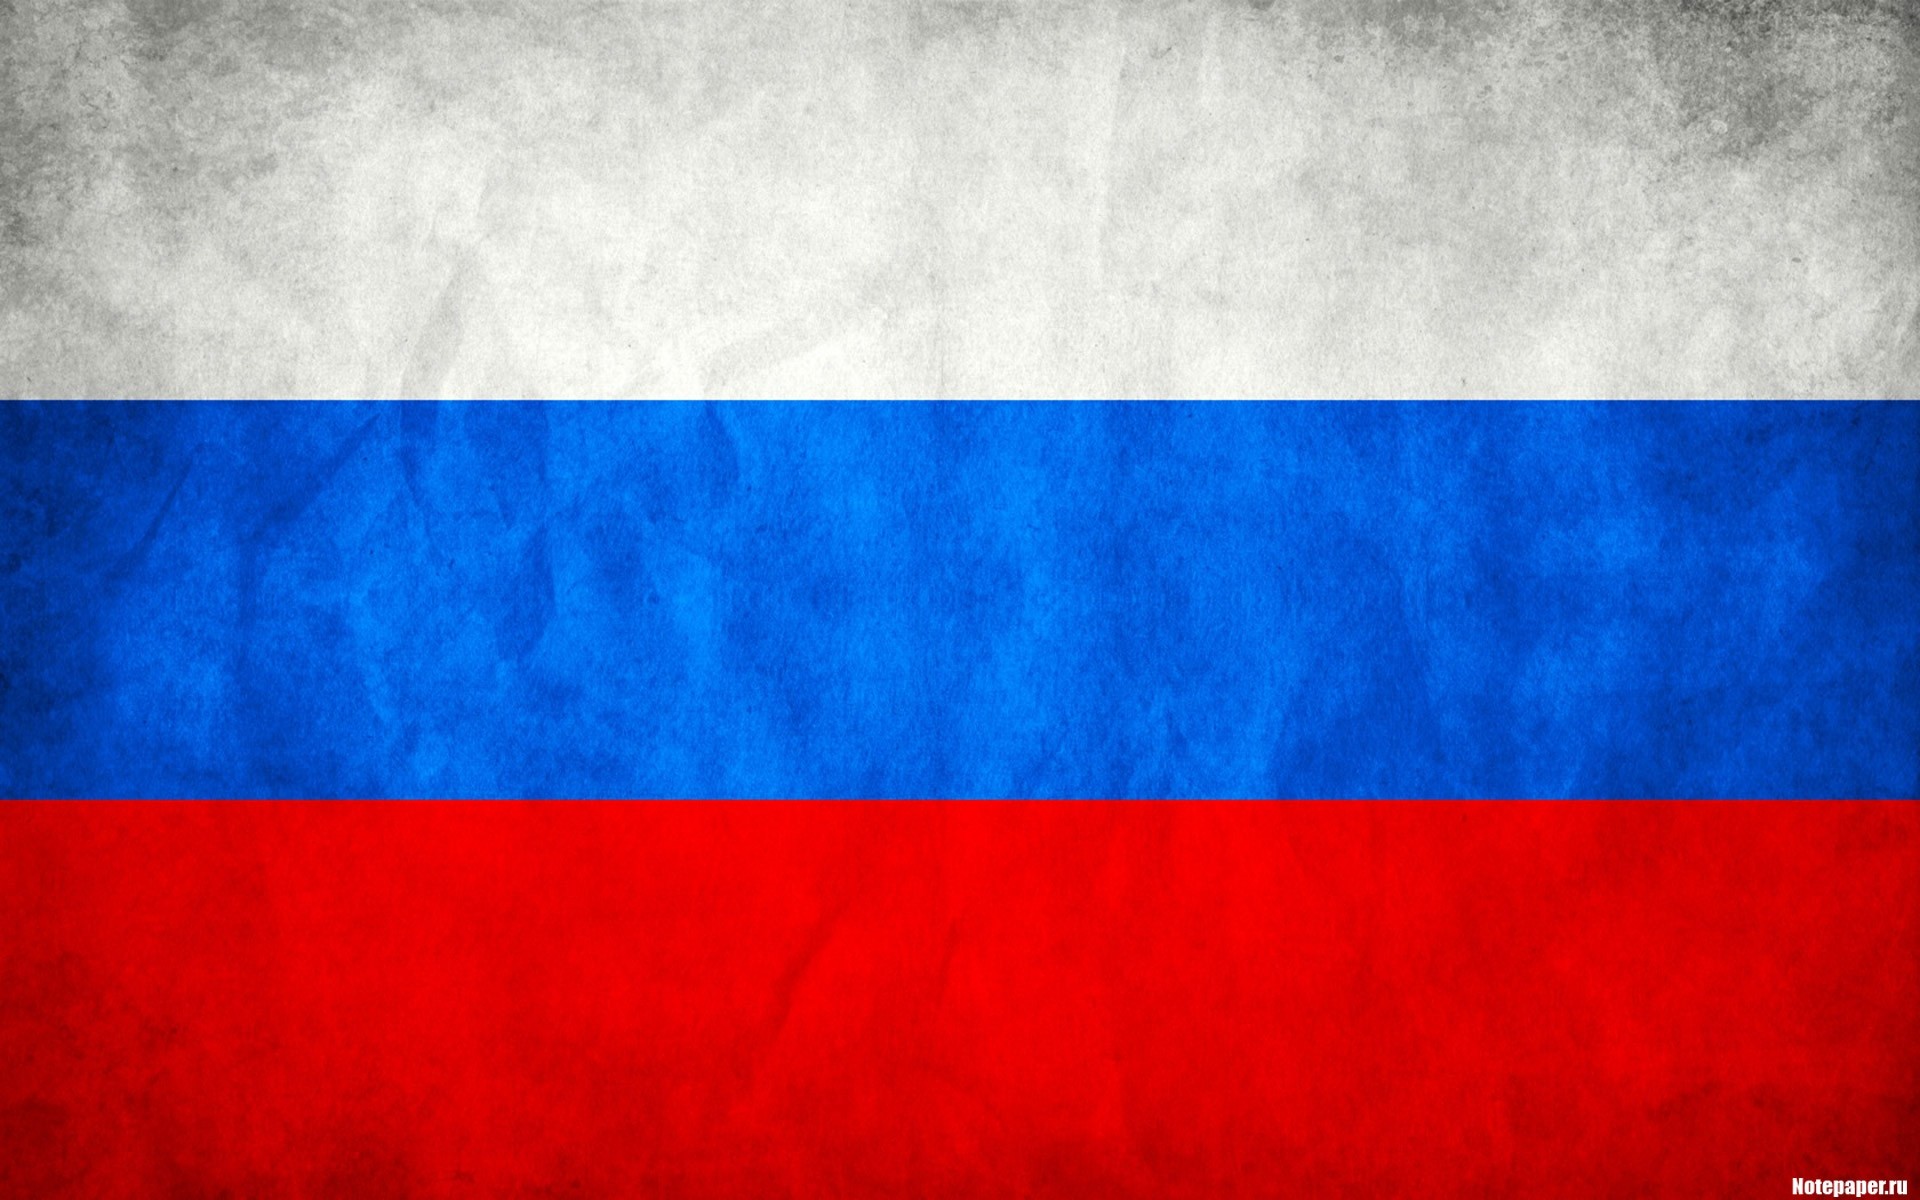 Blue Red White Russia Flags Russian Federation Wallpaper